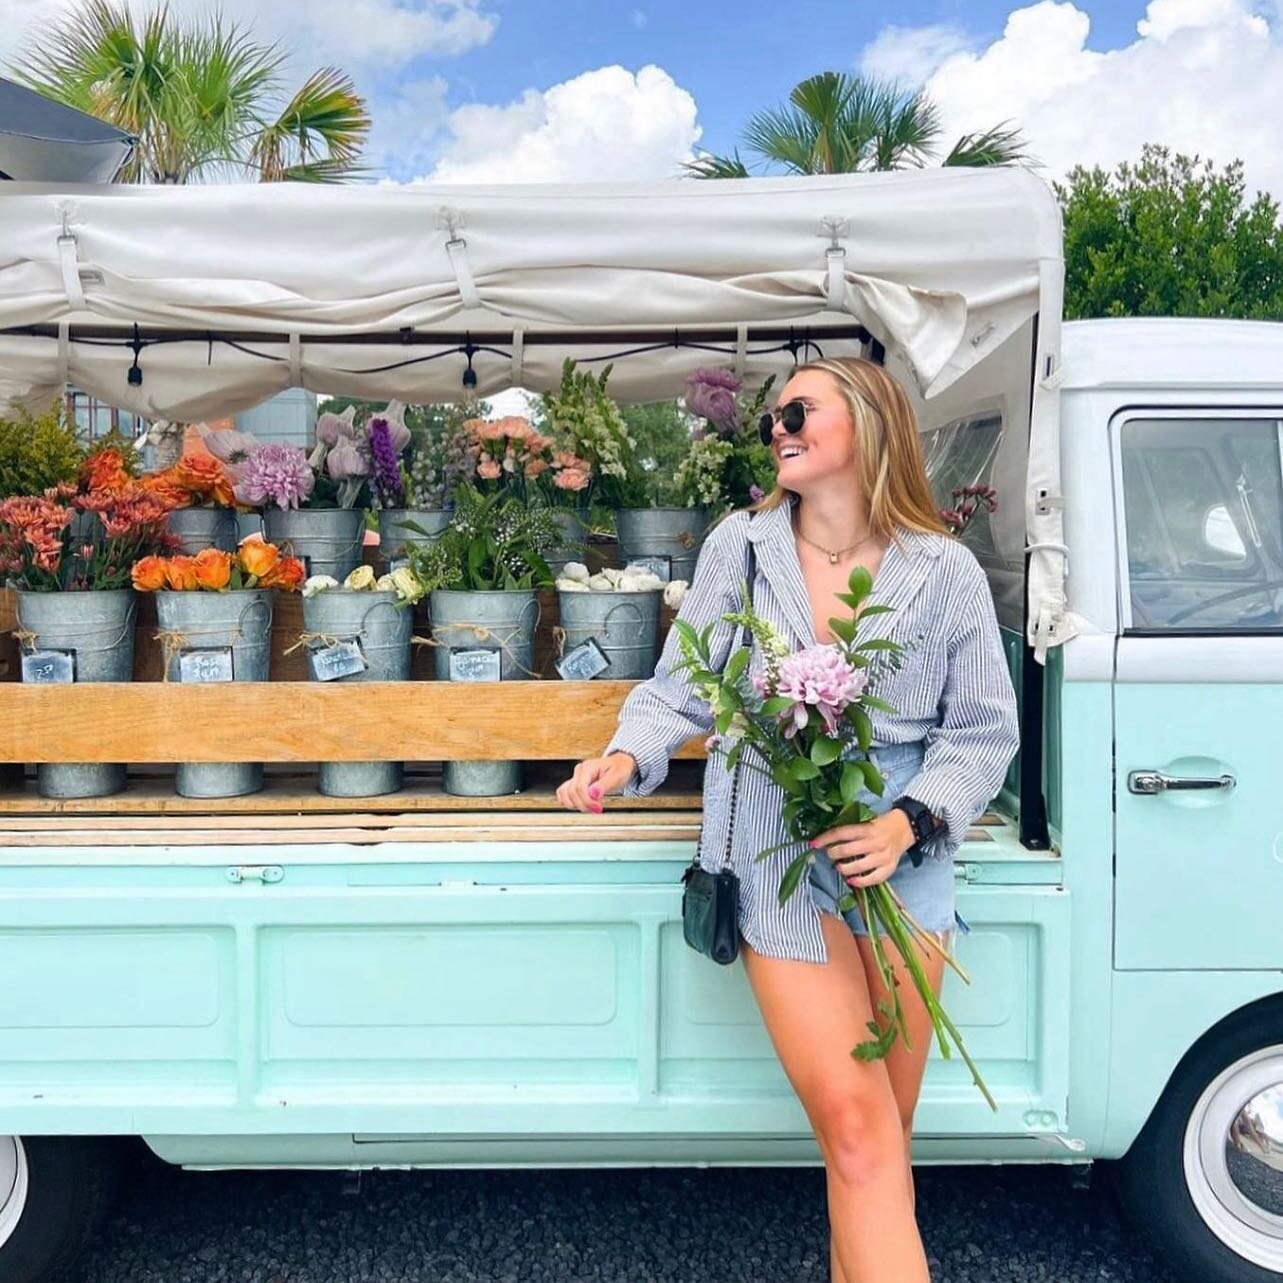 The @sweetjessamineflowertruck is back at The Cigar Factory this Saturday! Find her parked outside of @mercantileandmash from 8am until noon 🌸 

#thecigarfactory #charleston #charlestonsc #charlestonweekender #explorecharleston